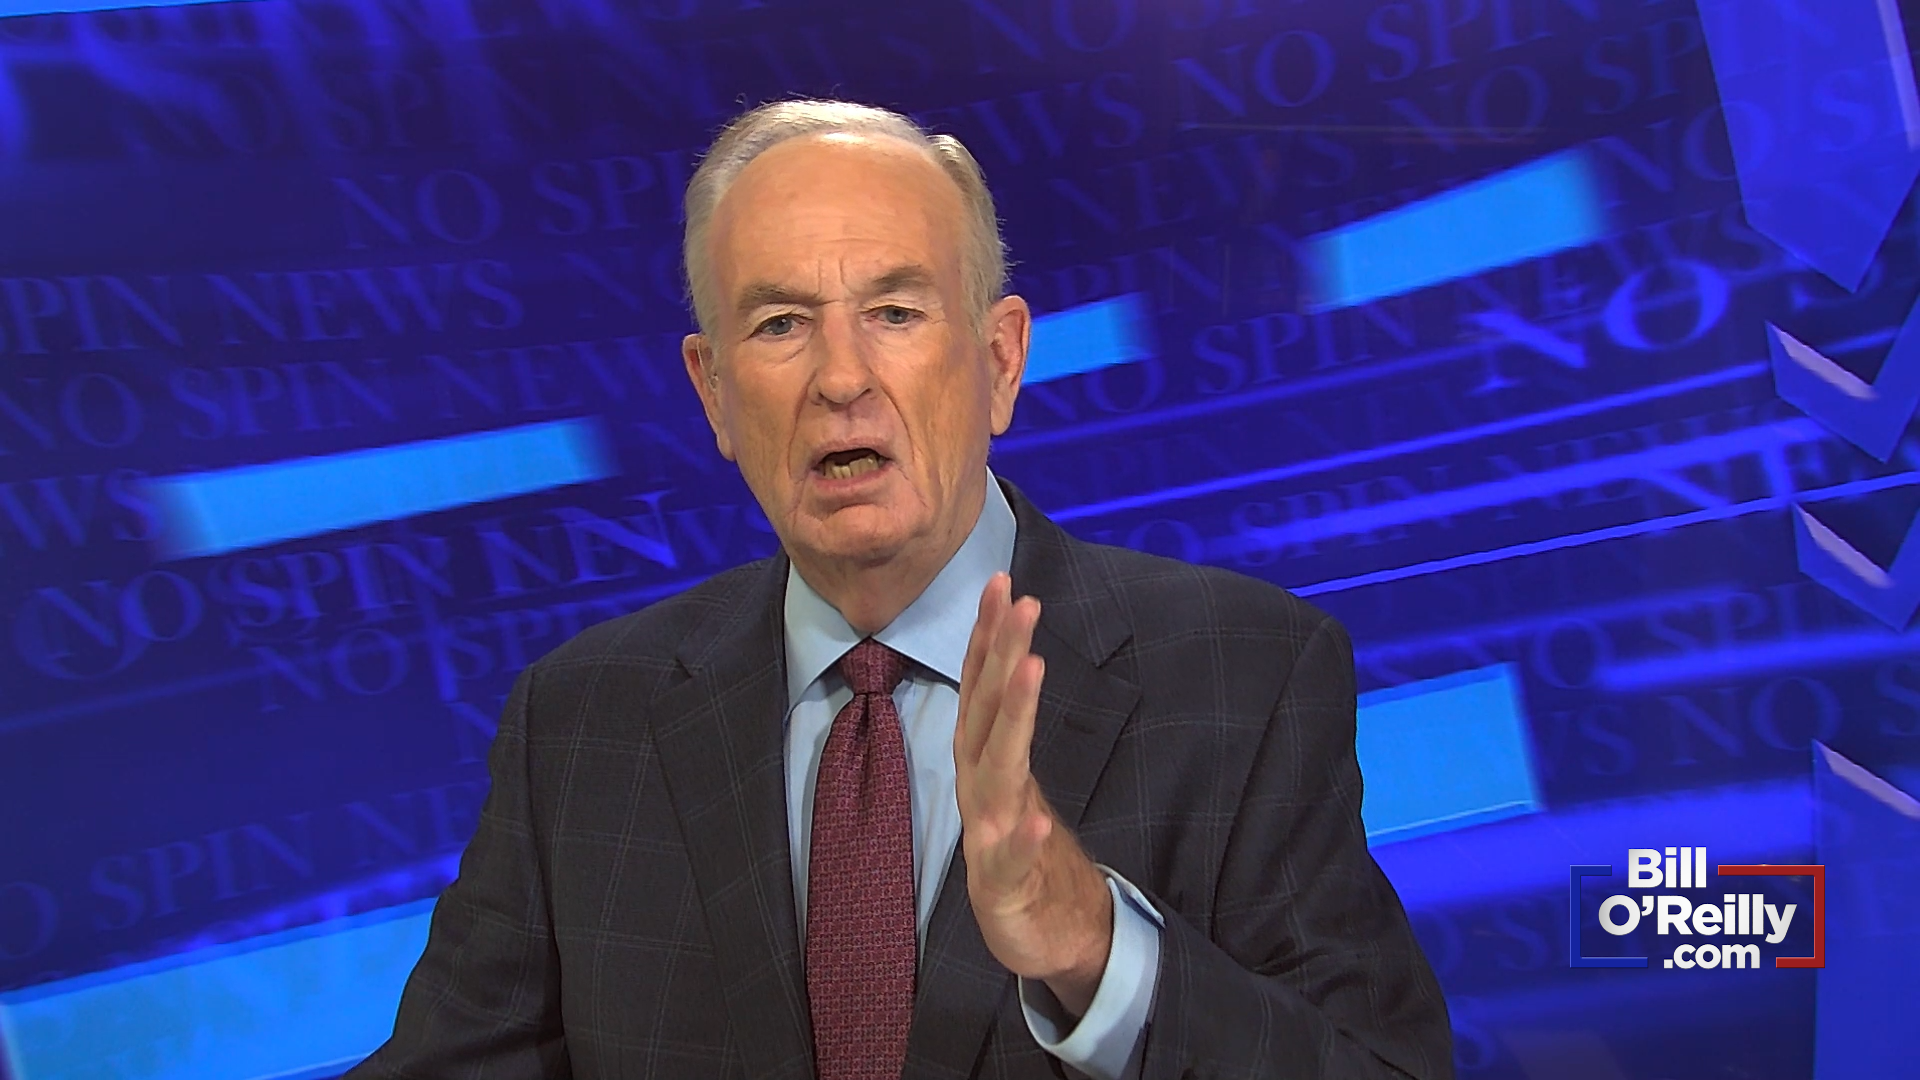 O'Reilly: Liberal Border Policies Causing 'Death, Destruction, Displacement of Children'